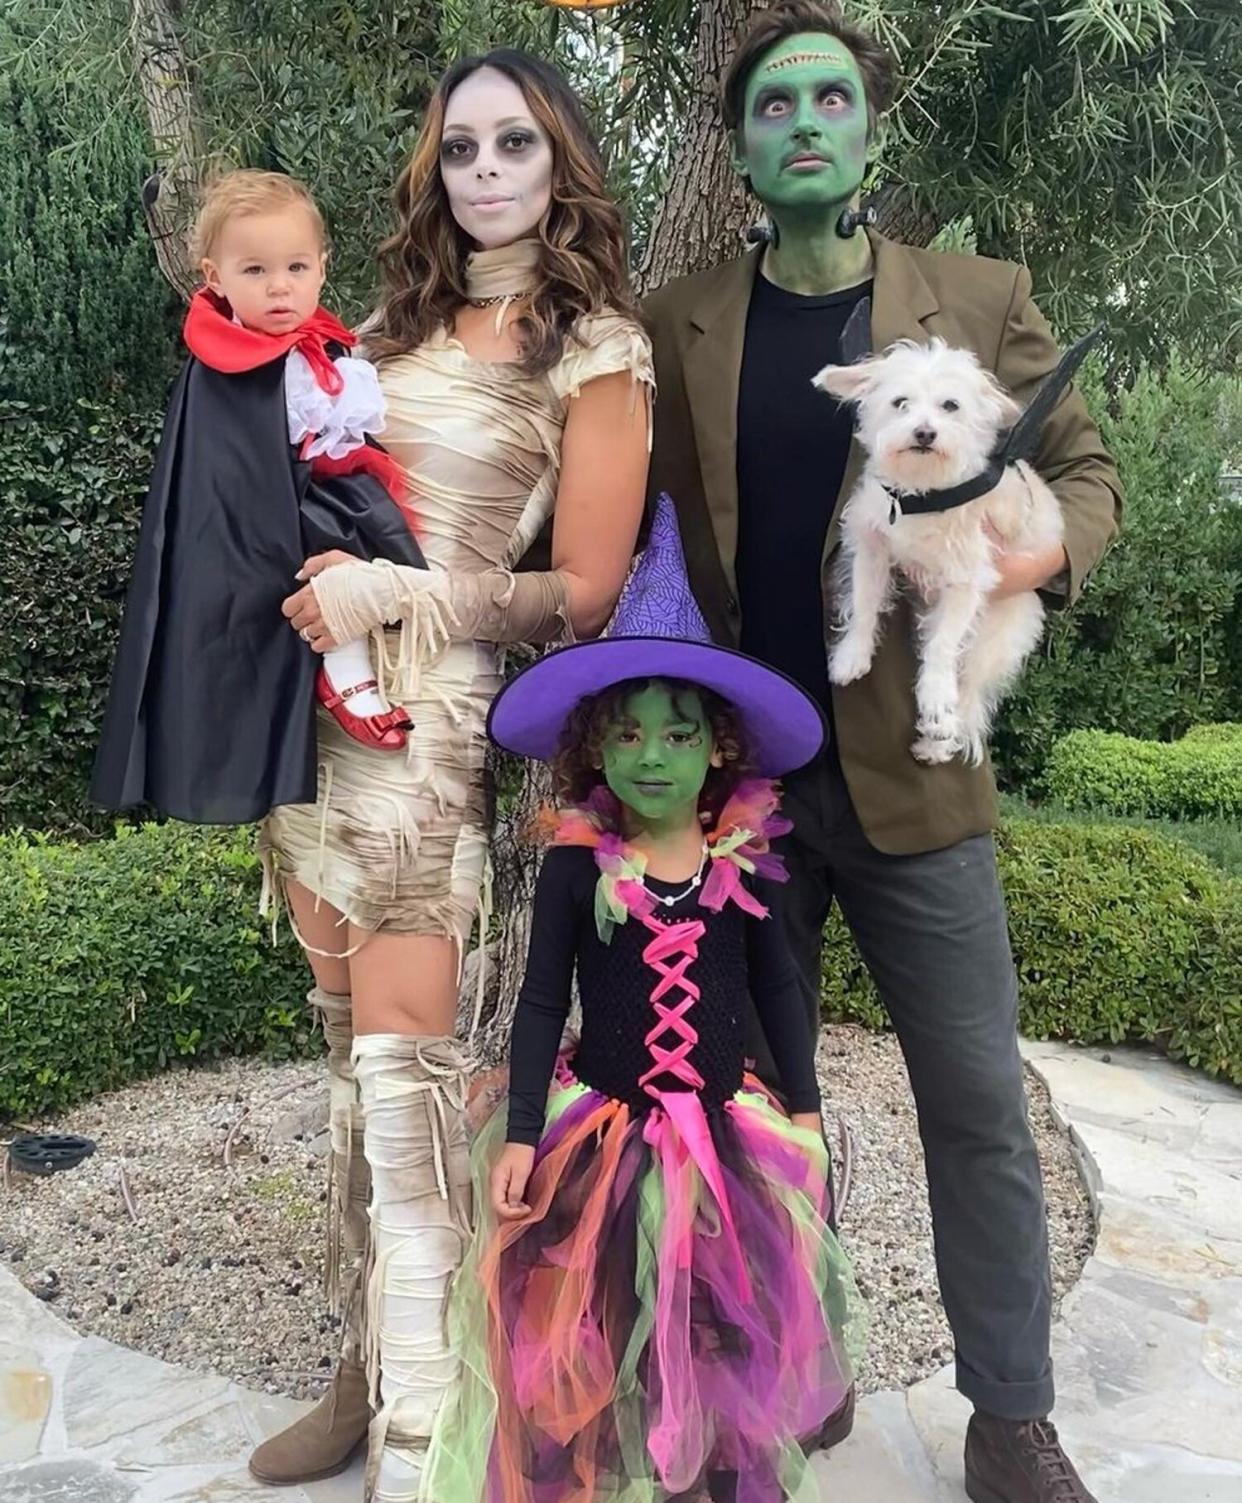 Amber Stevens West Sticks to 'Classics' for Her Family's Halloween Costumes